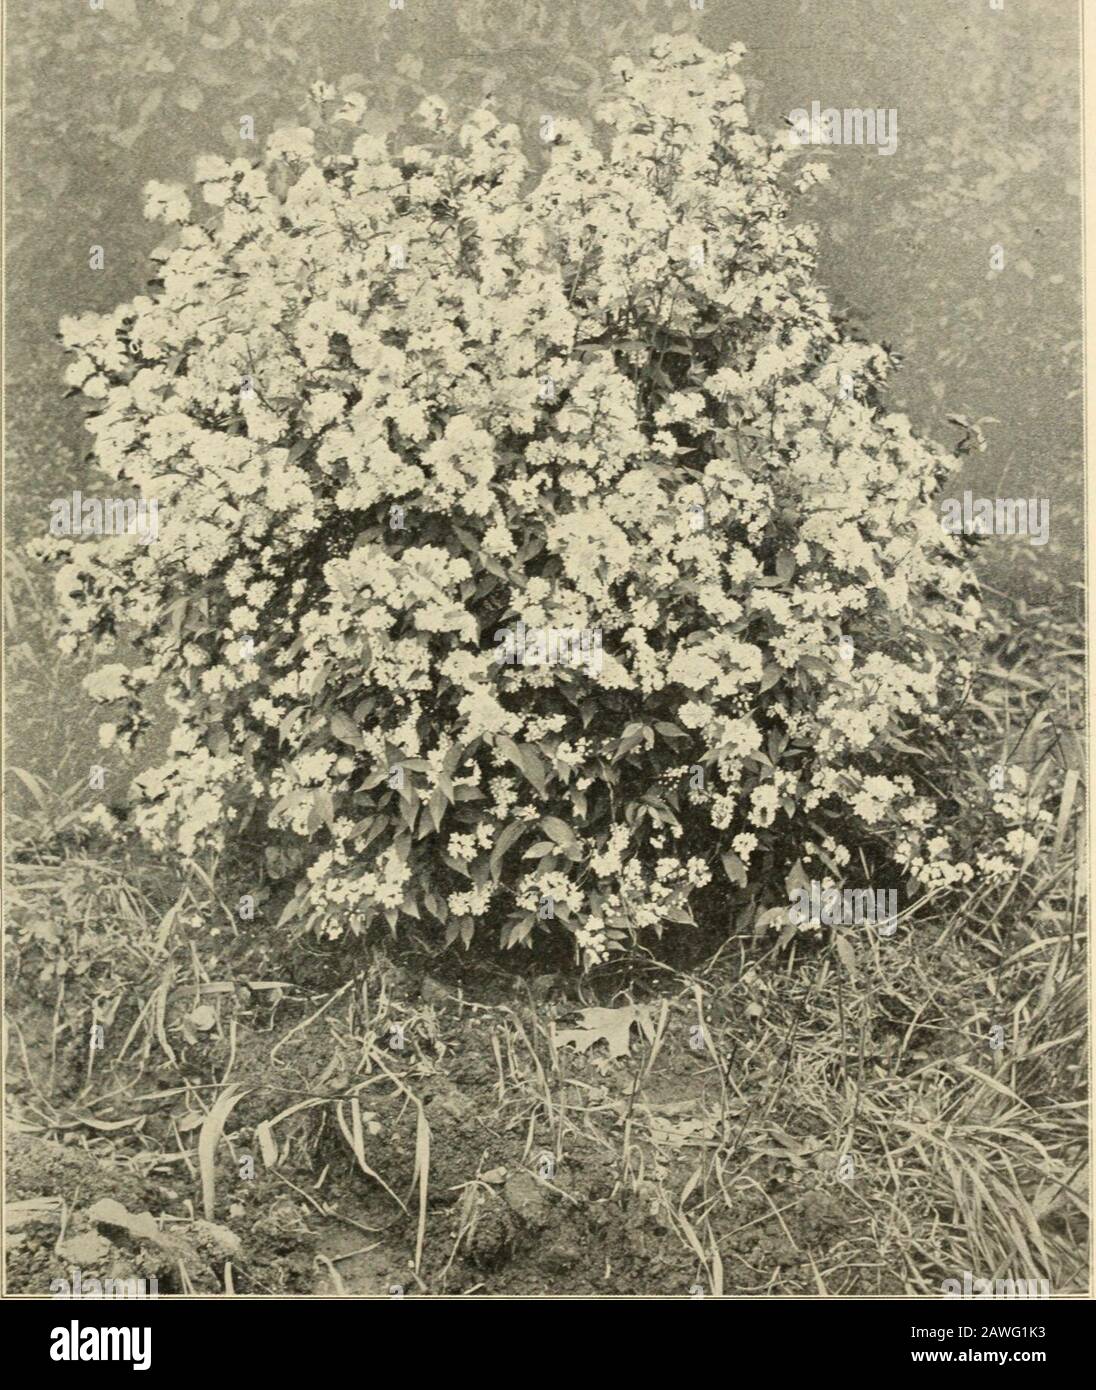 Mount Hope Nurseries established 1840 : general catalogue . he best. 35c. var. nana foliis variegatis. Variegated-leaved Dwarf Weigela. E. Of dwarf habit,and possessing clearly defined, silvery variegated leaves; flowers nearly white. It stands the sunwell, and is one of the best dwarf variegated-leaved shrubs. 35c. var. Sieboldi alba marginata. D. Of upright habit. When the leaves are young the variega-tion is yellow; when they mature it becomes silvery white; flowers rose-colored. A splendidvariegated-leaved shrub. 35c. EL^AGNUS. Oleaster E. argentea. Silver-leaved Oleaster. D. A native spec Stock Photo